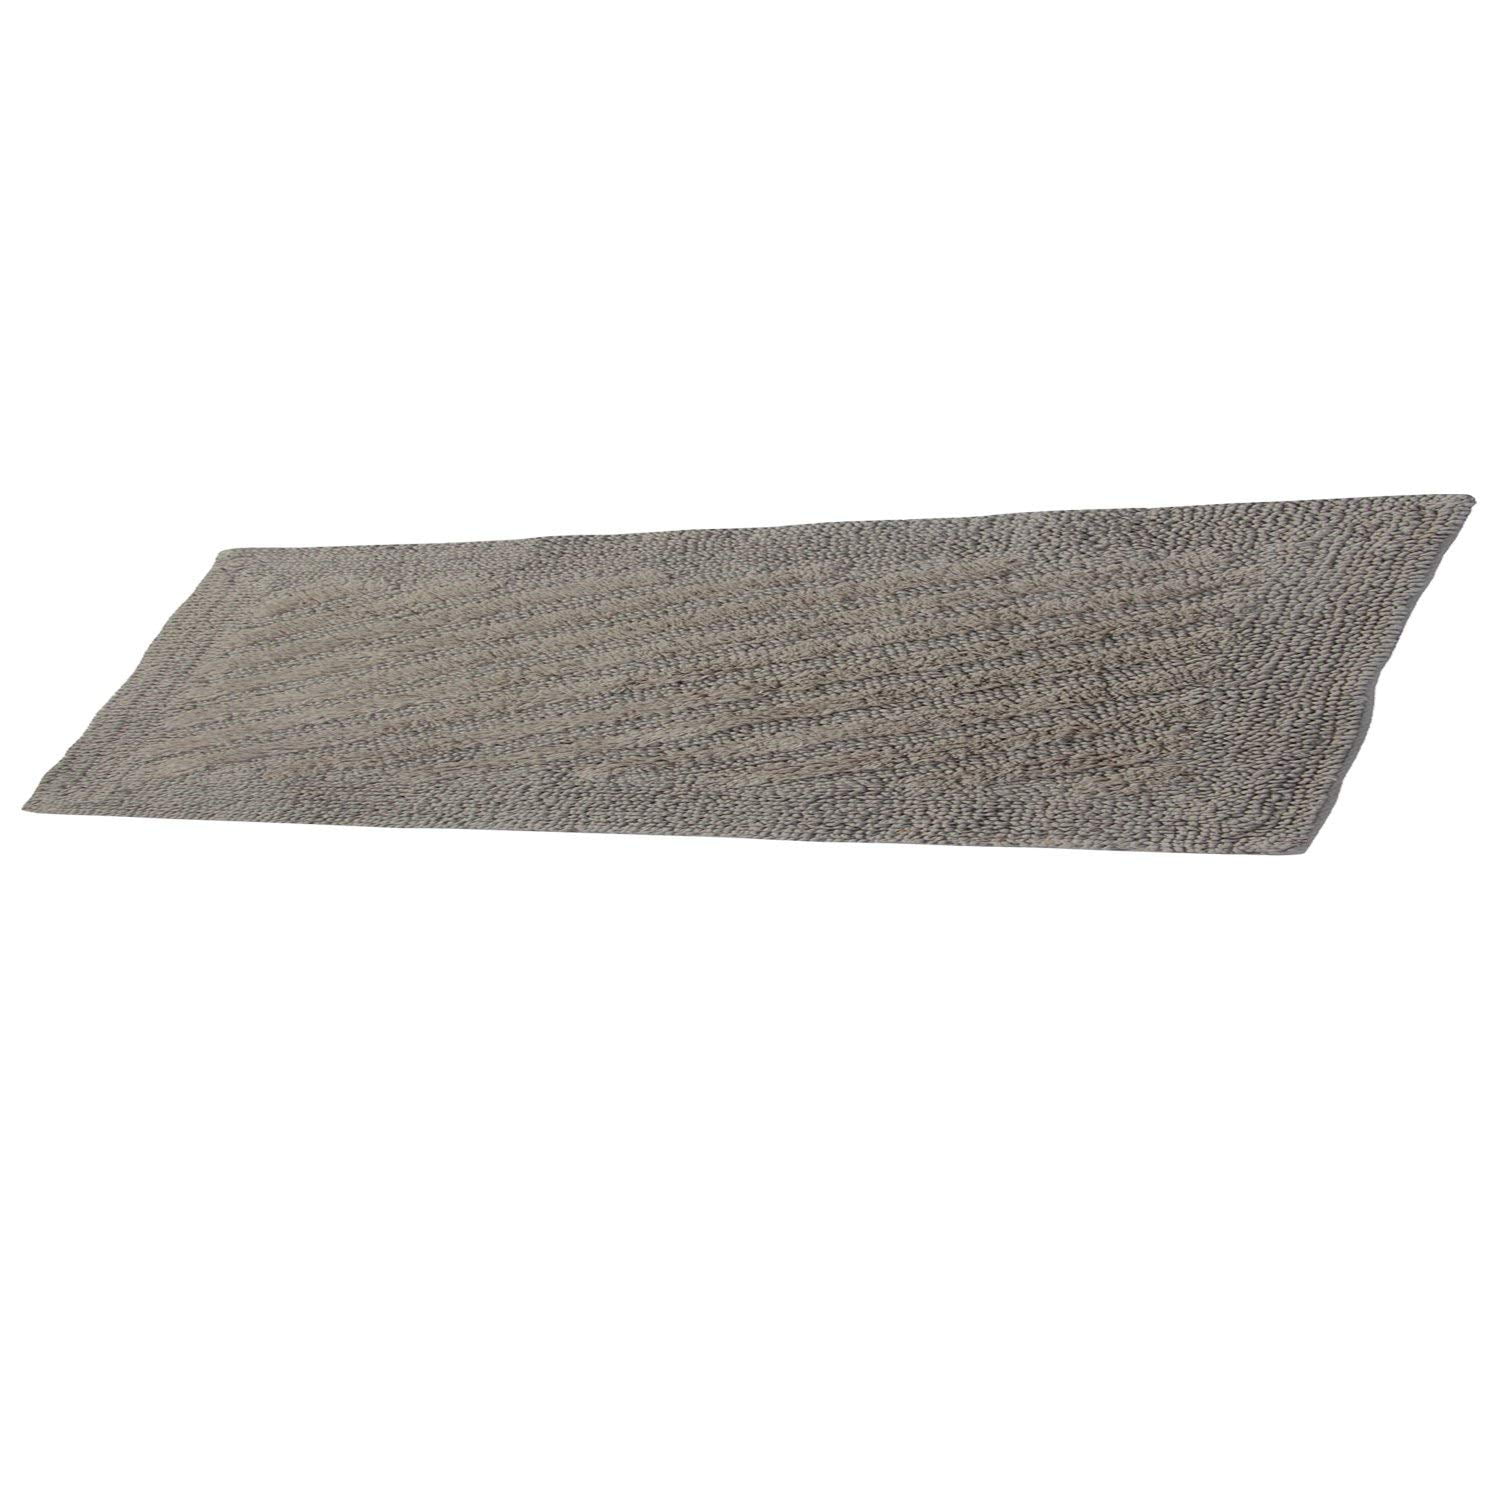 Castle Hill Wide Cut Reversible Bath Rug 17 by 24-Inch Natural